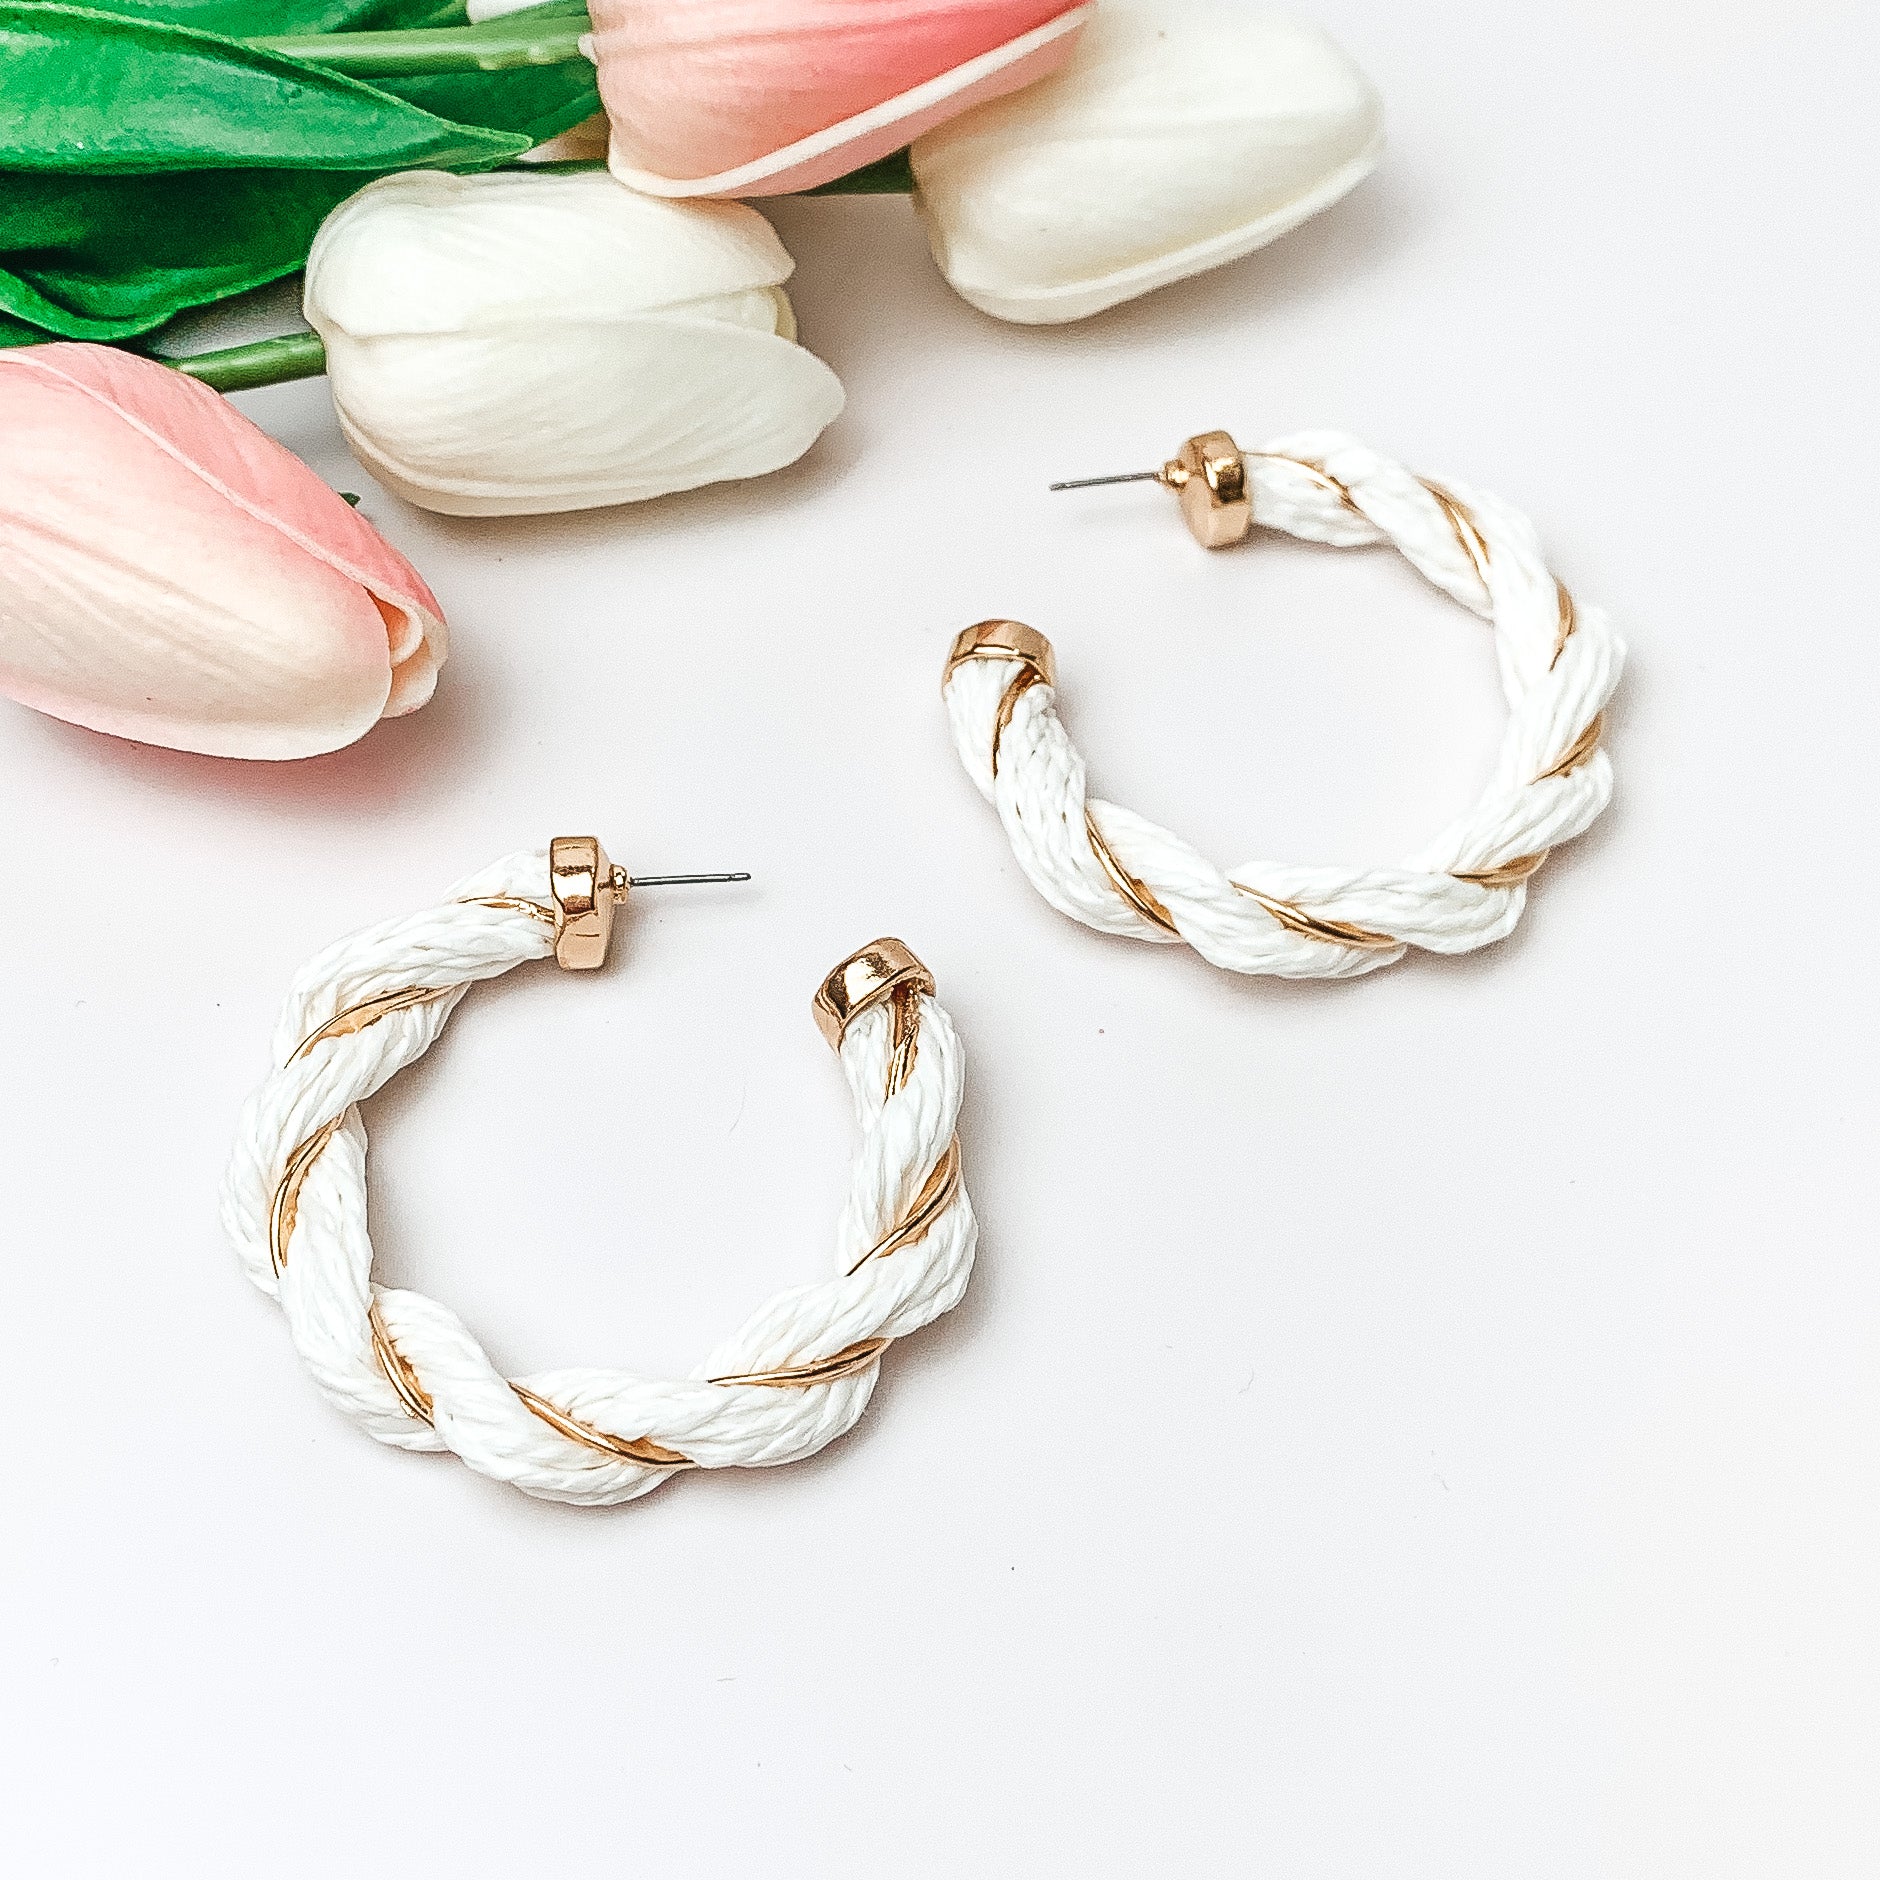 Pictured are white raffia twisted hoop earrings with gold detailing.  They are pictured with pink and white tulips on a white background.